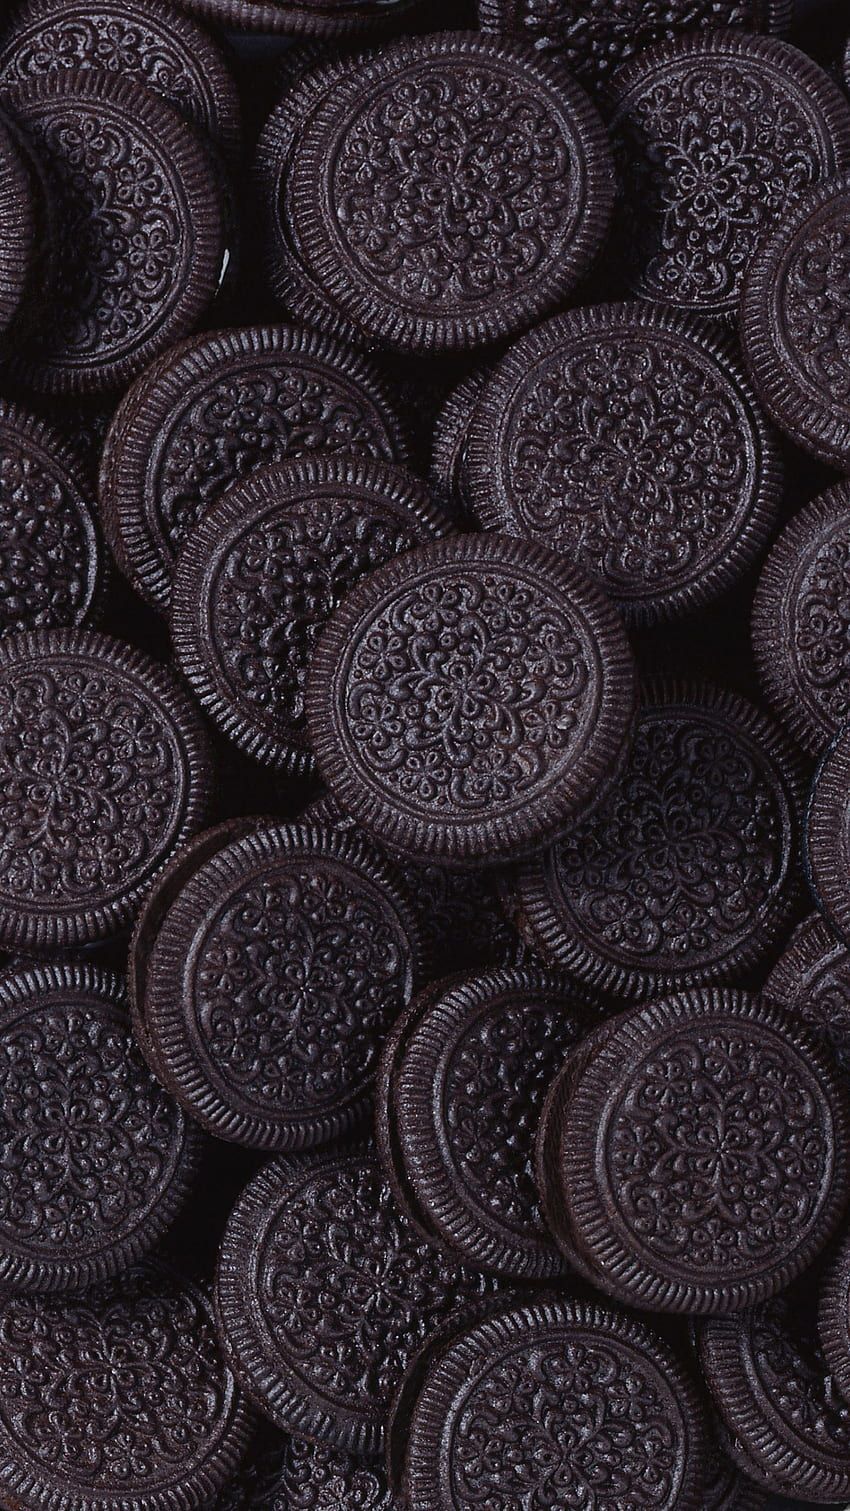 A close up of chocolate sandwich cookies - Oreo